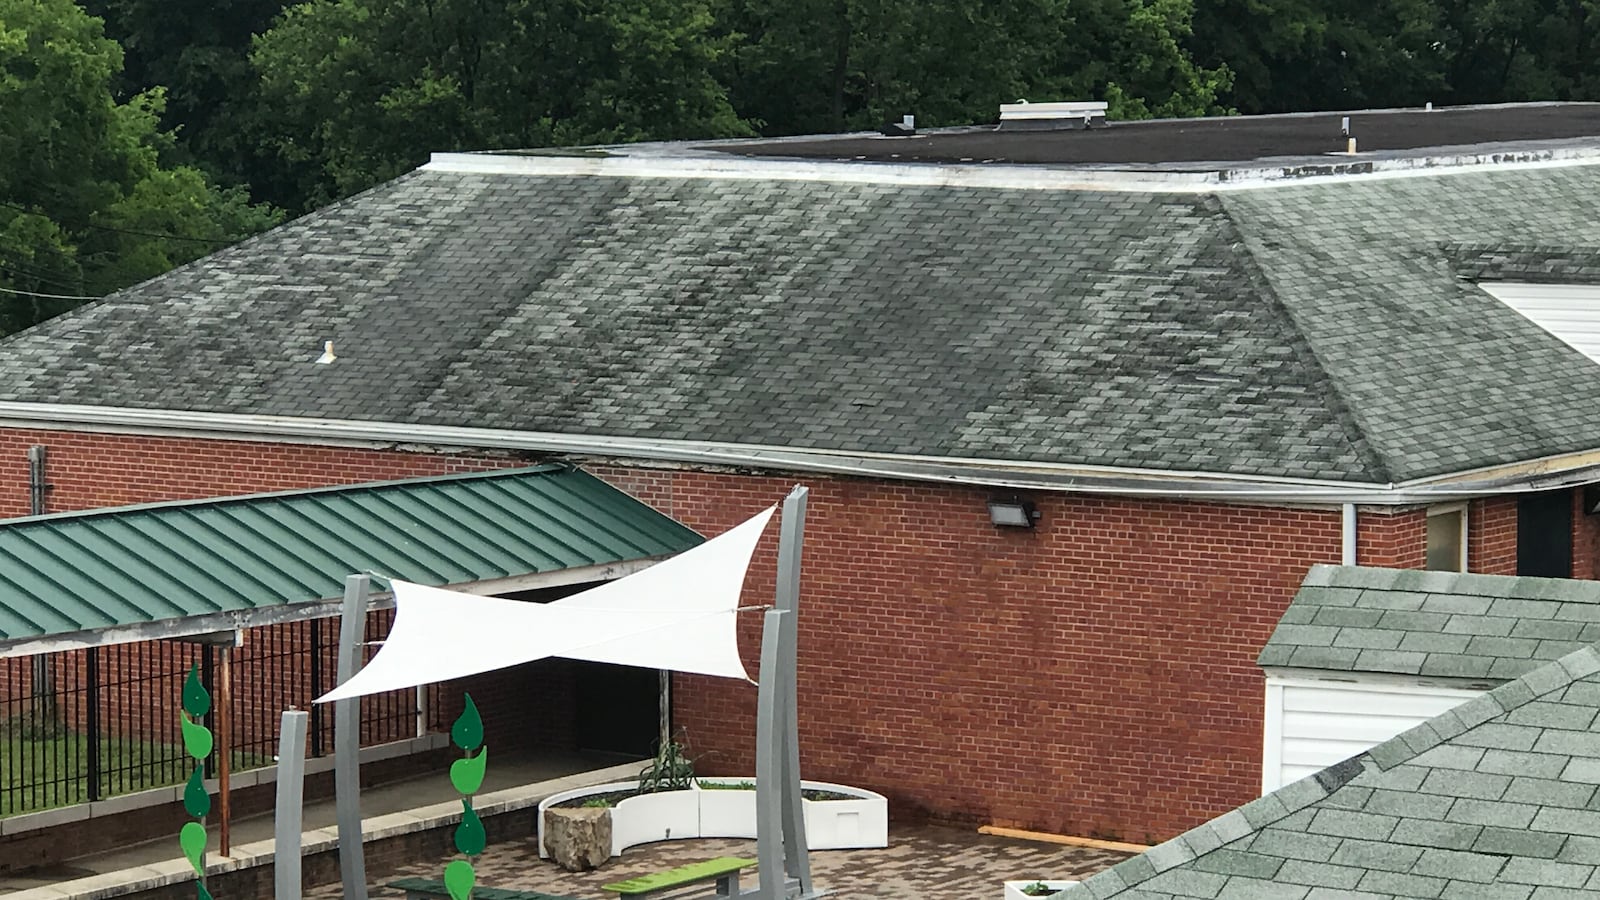 Vision Preparatory Charter School in Memphis is among recipients of state grants, which could increase under Gov. Bill Lee's administration, to help pay for facility needs. Building maintenance, especially roof repair, has been an issue for the school.